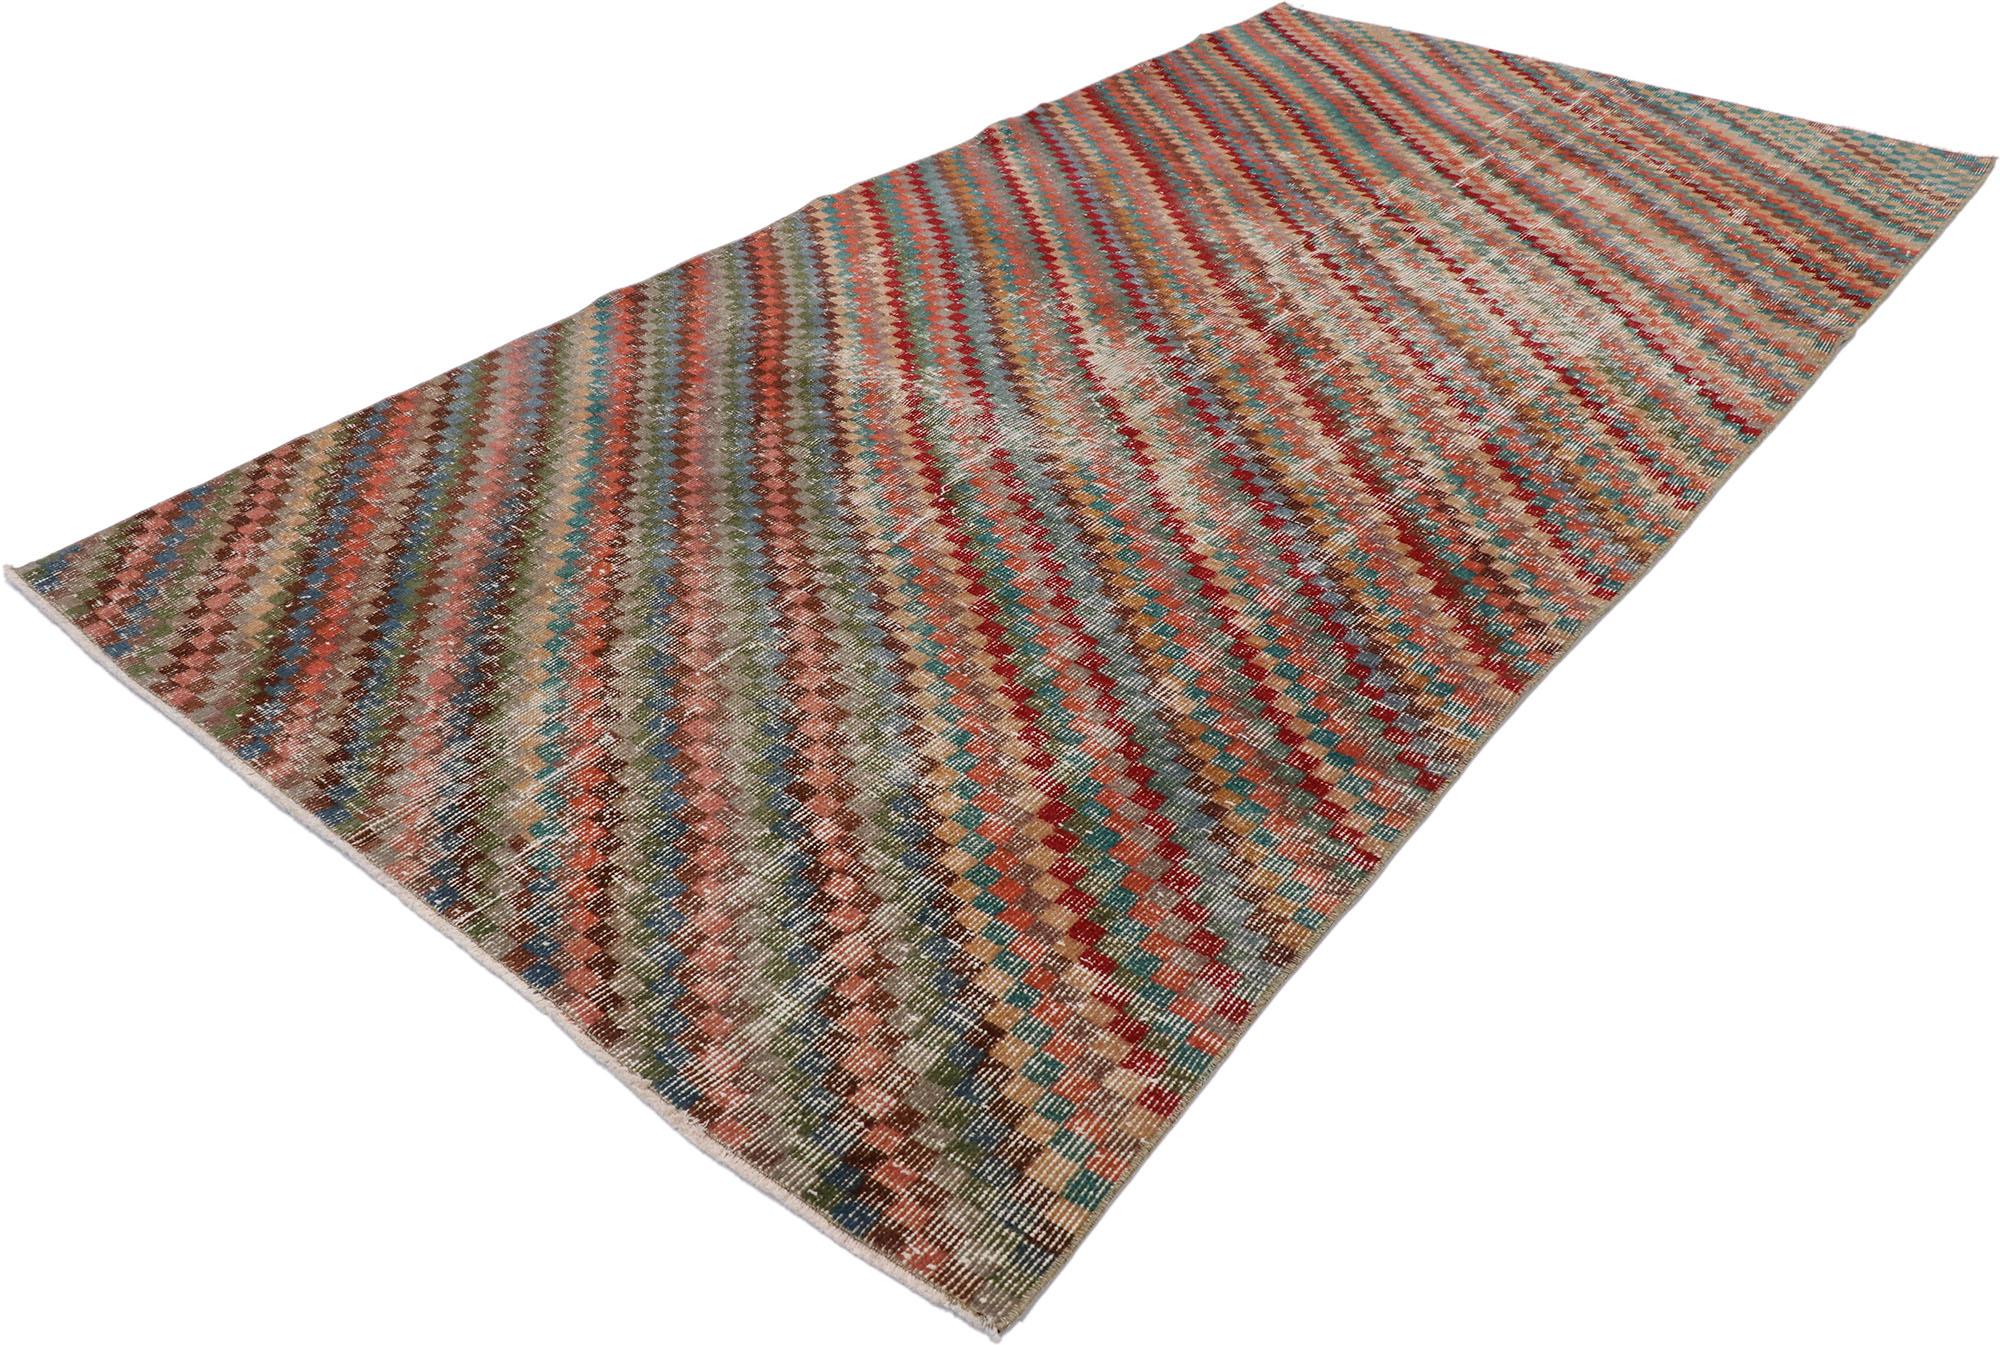 53298, distressed vintage Turkish Sivas rug with modern rustic cubist style. Warm and inviting with rustic sensibility. this hand knotted wool distressed vintage Turkish Sivas rug features an all-over checkered diagonal stripe pattern comprised of